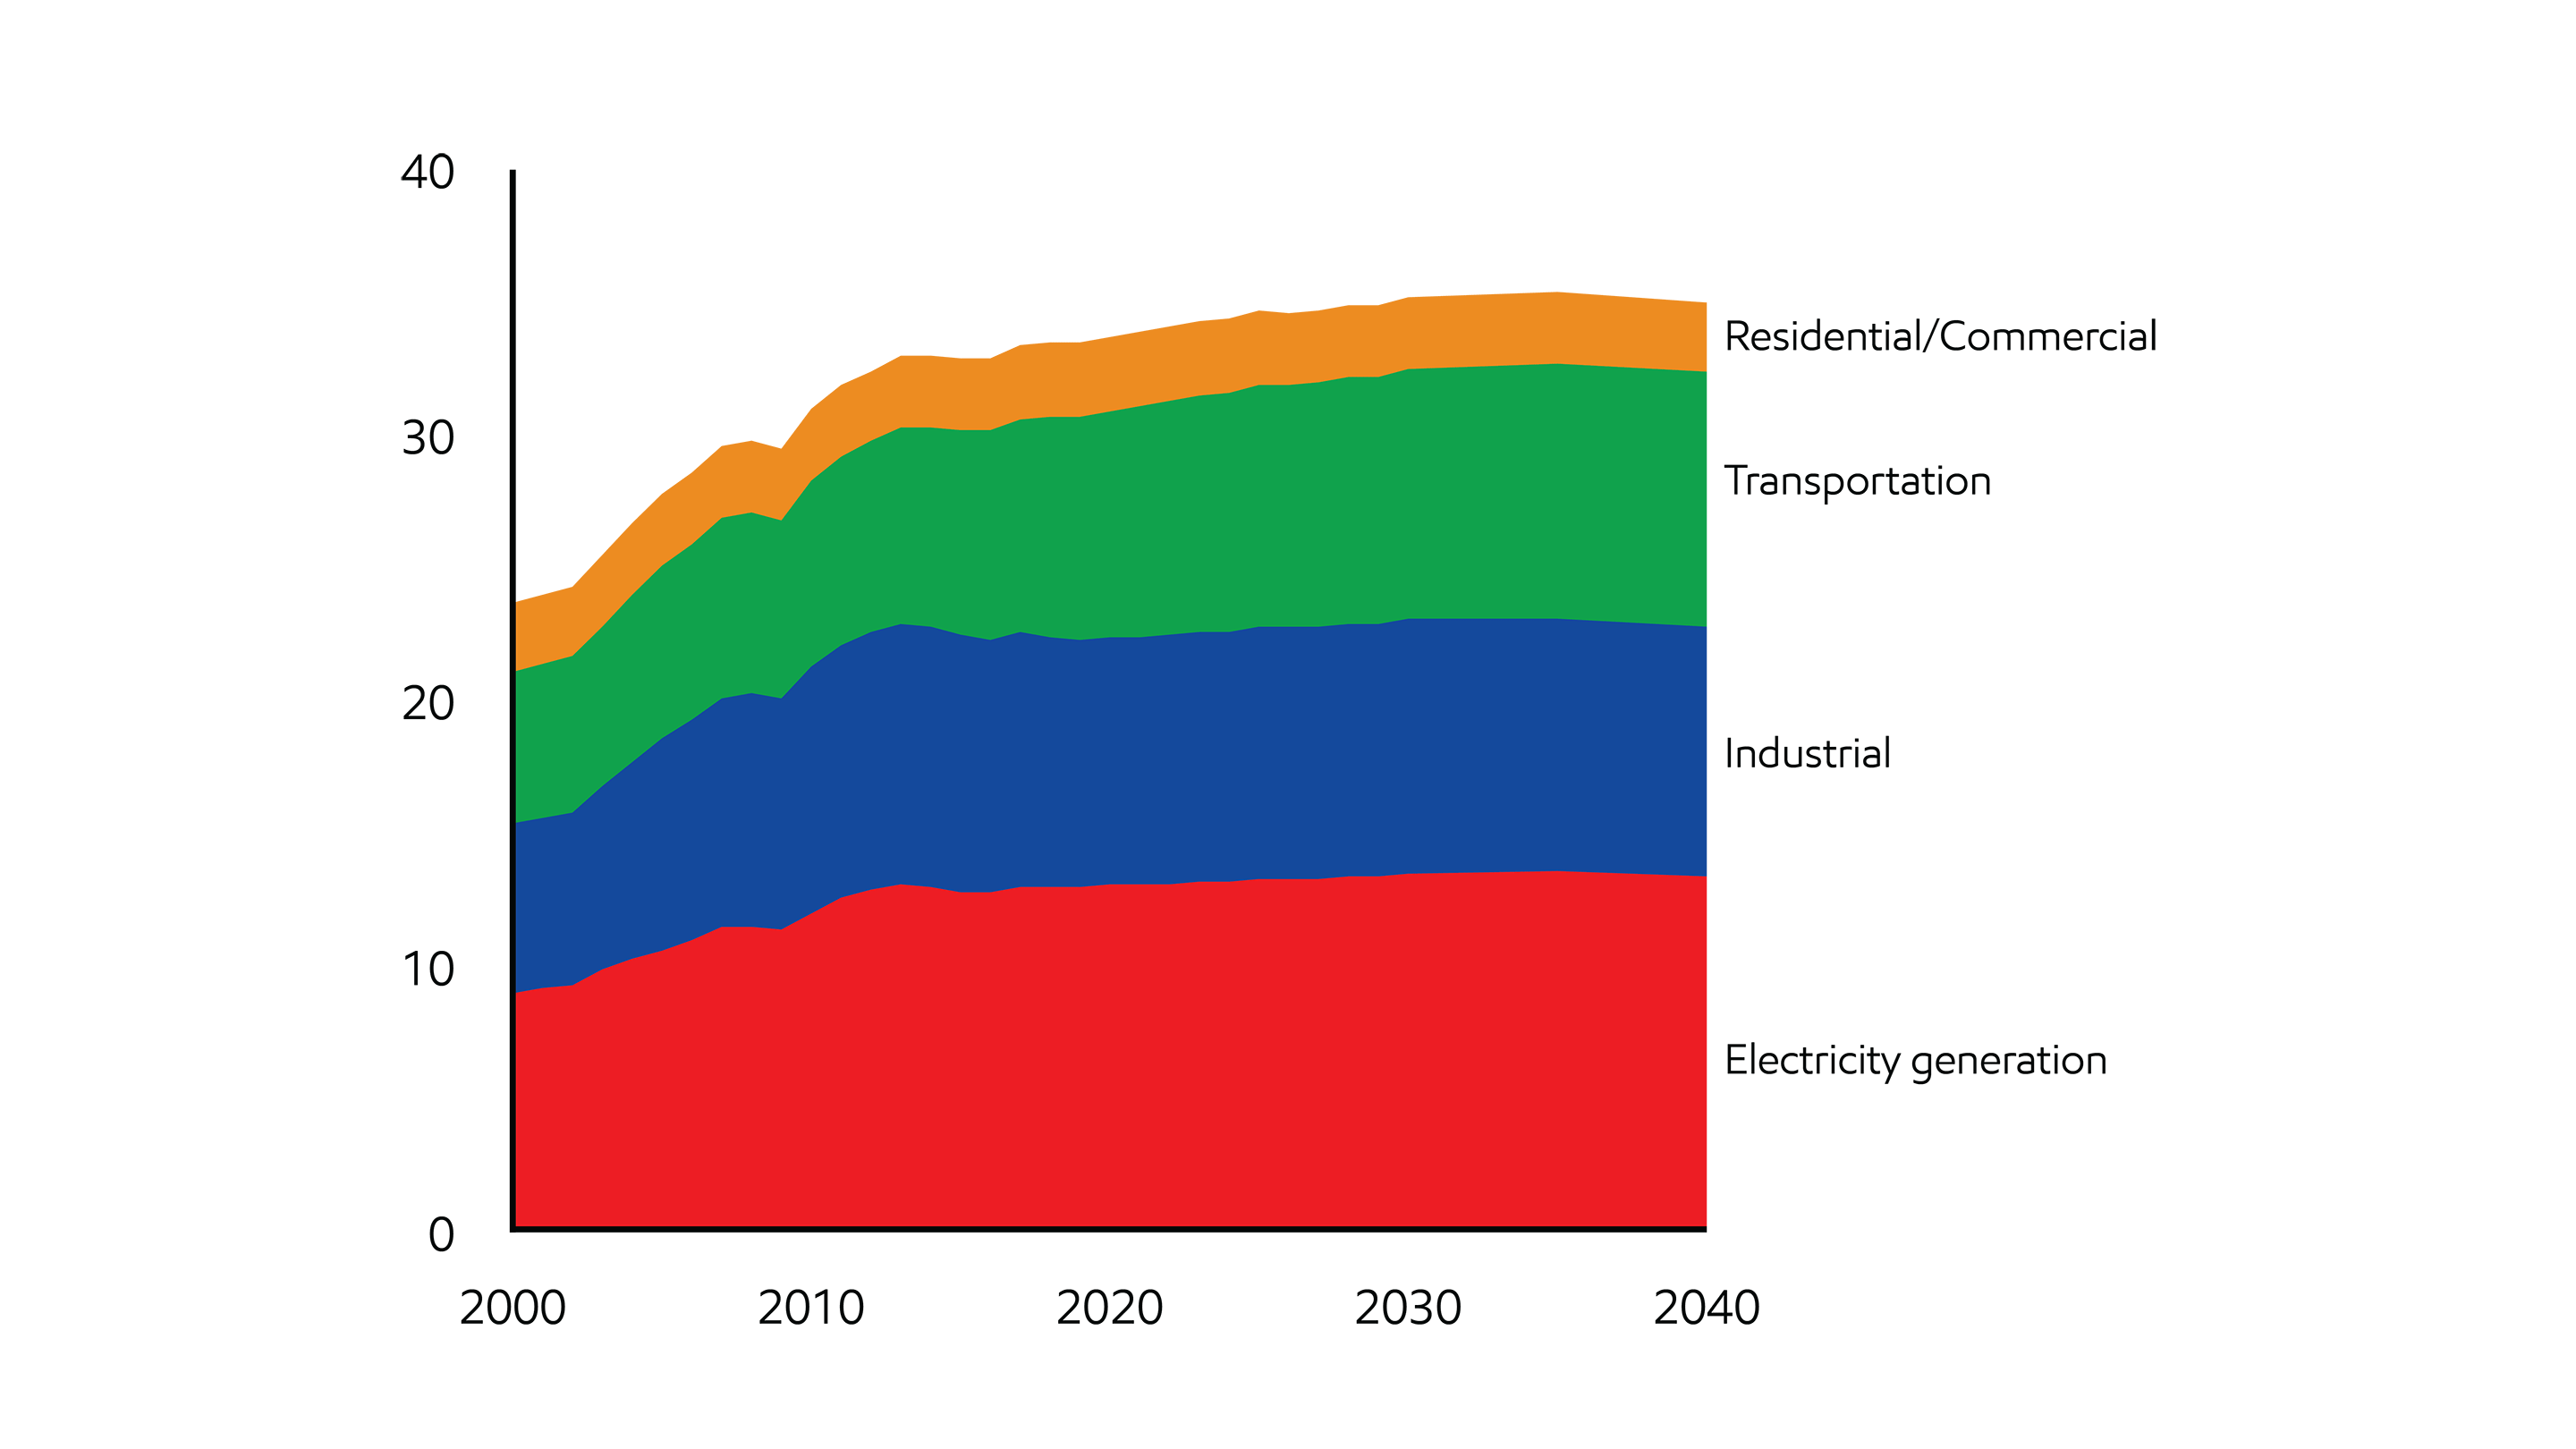 Image All sectors contributing to restrain CO2 emissions growth